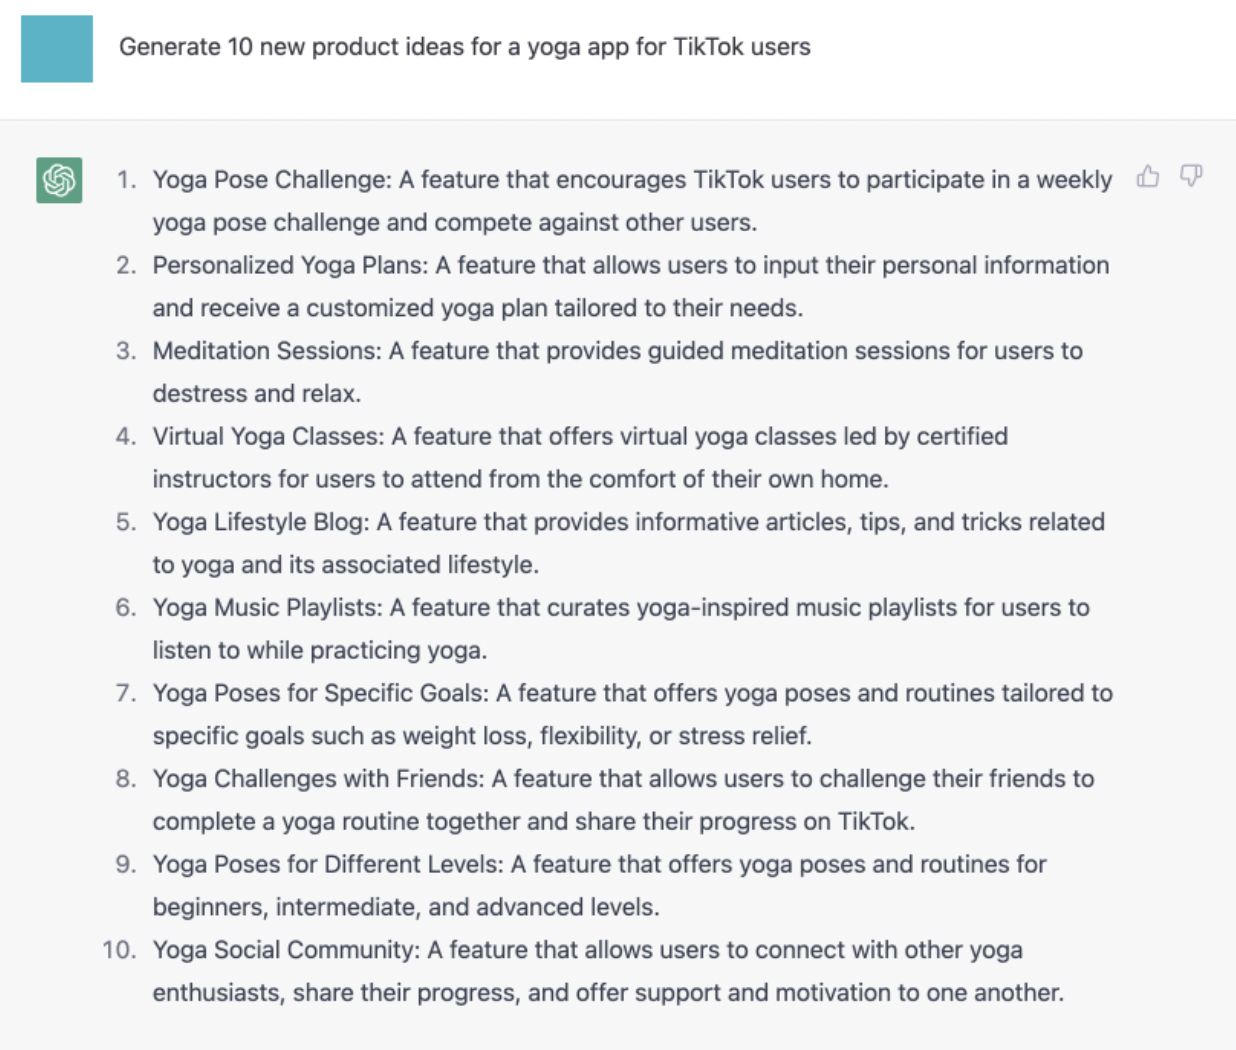 Use case with a prompt “Generate 10 new product ideas for a yoga app for TikTok users”.